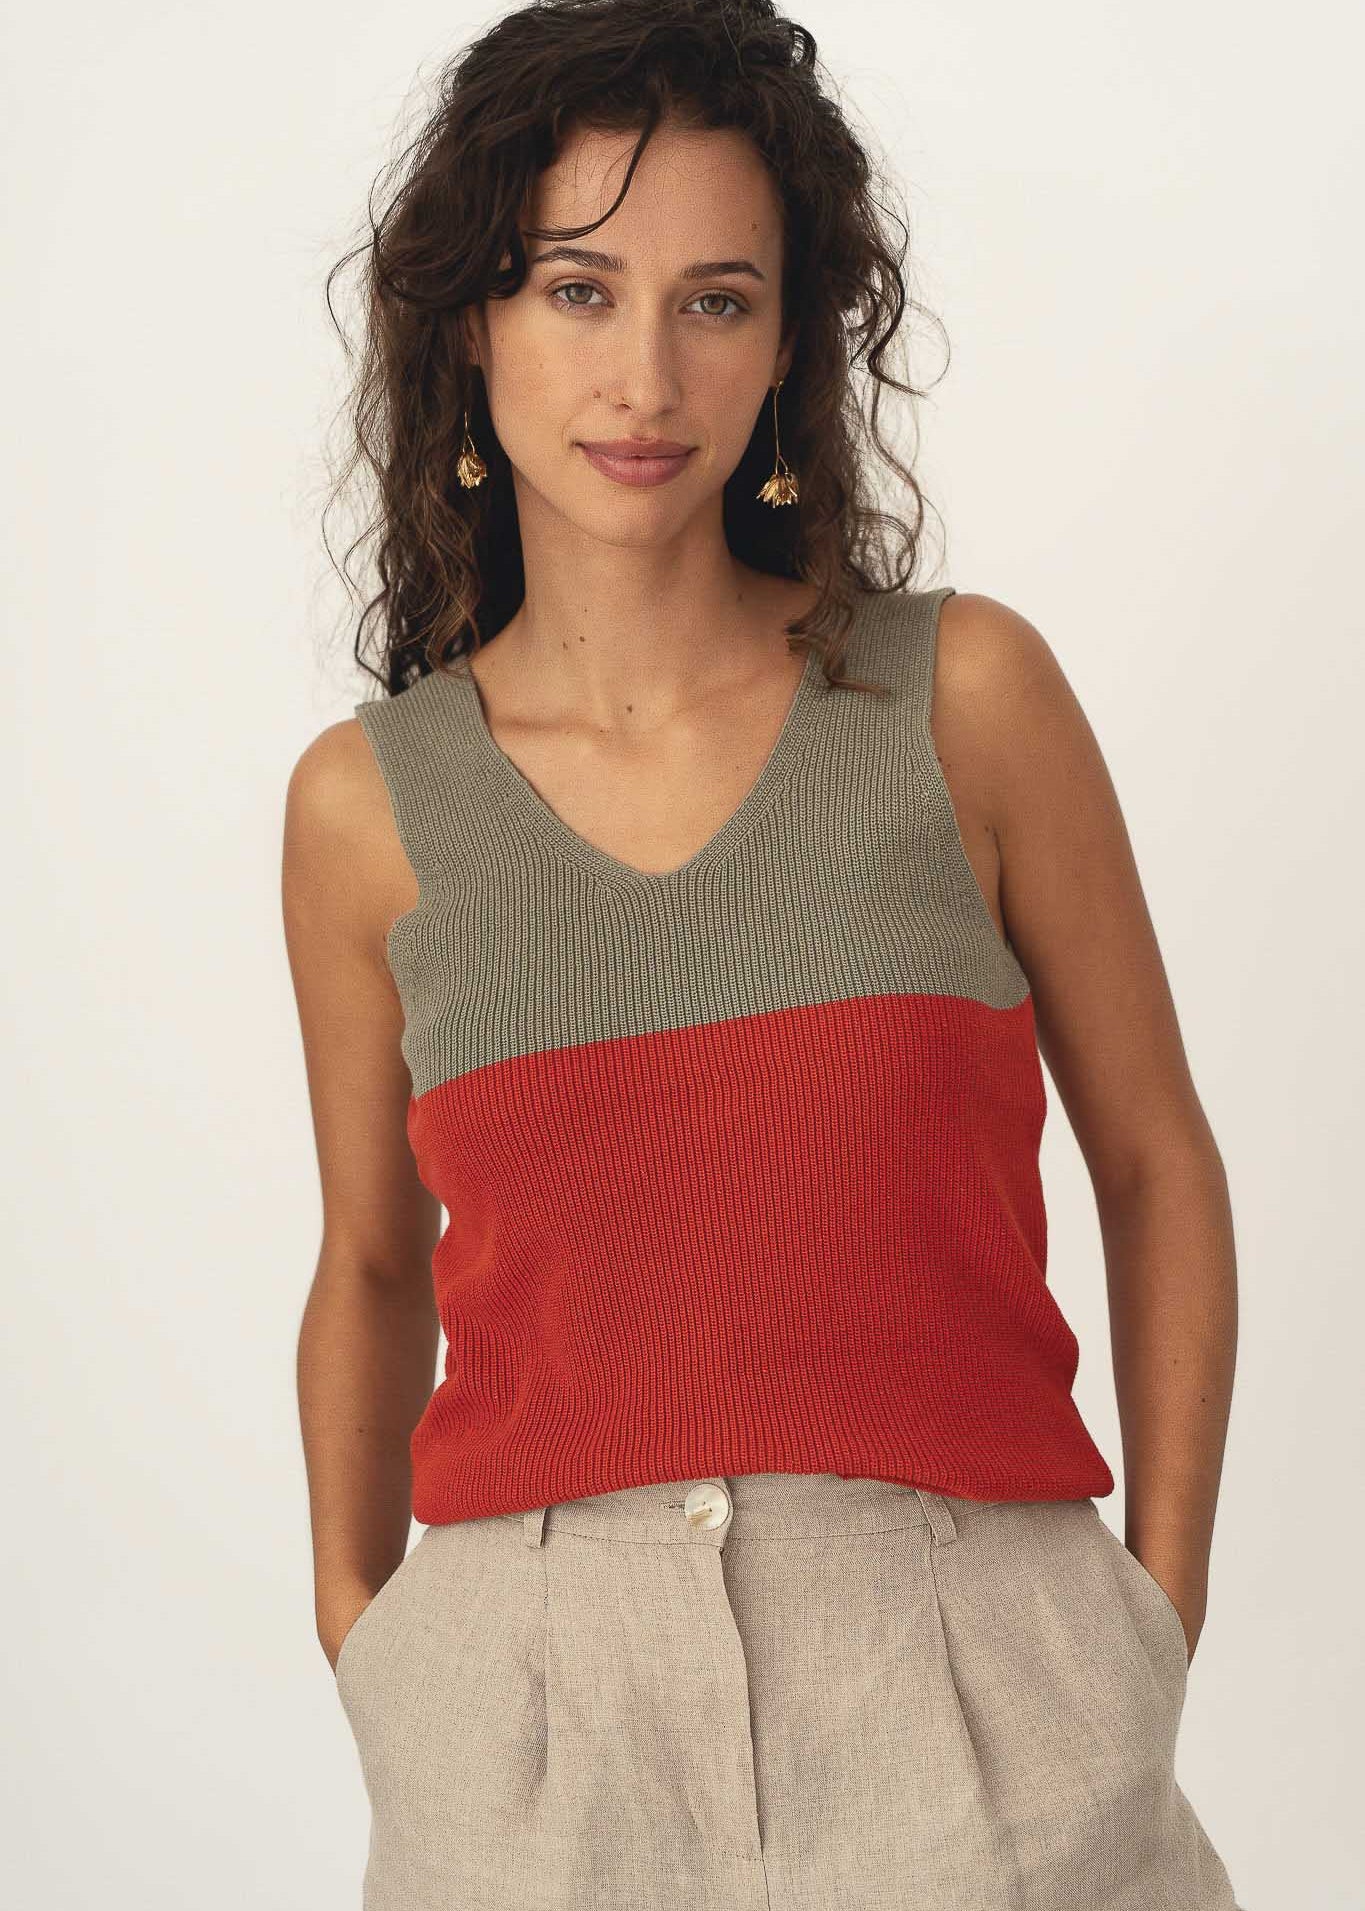 Women's sleeveless summer top in pink and green. Made from recycled fibers in Portugal. 